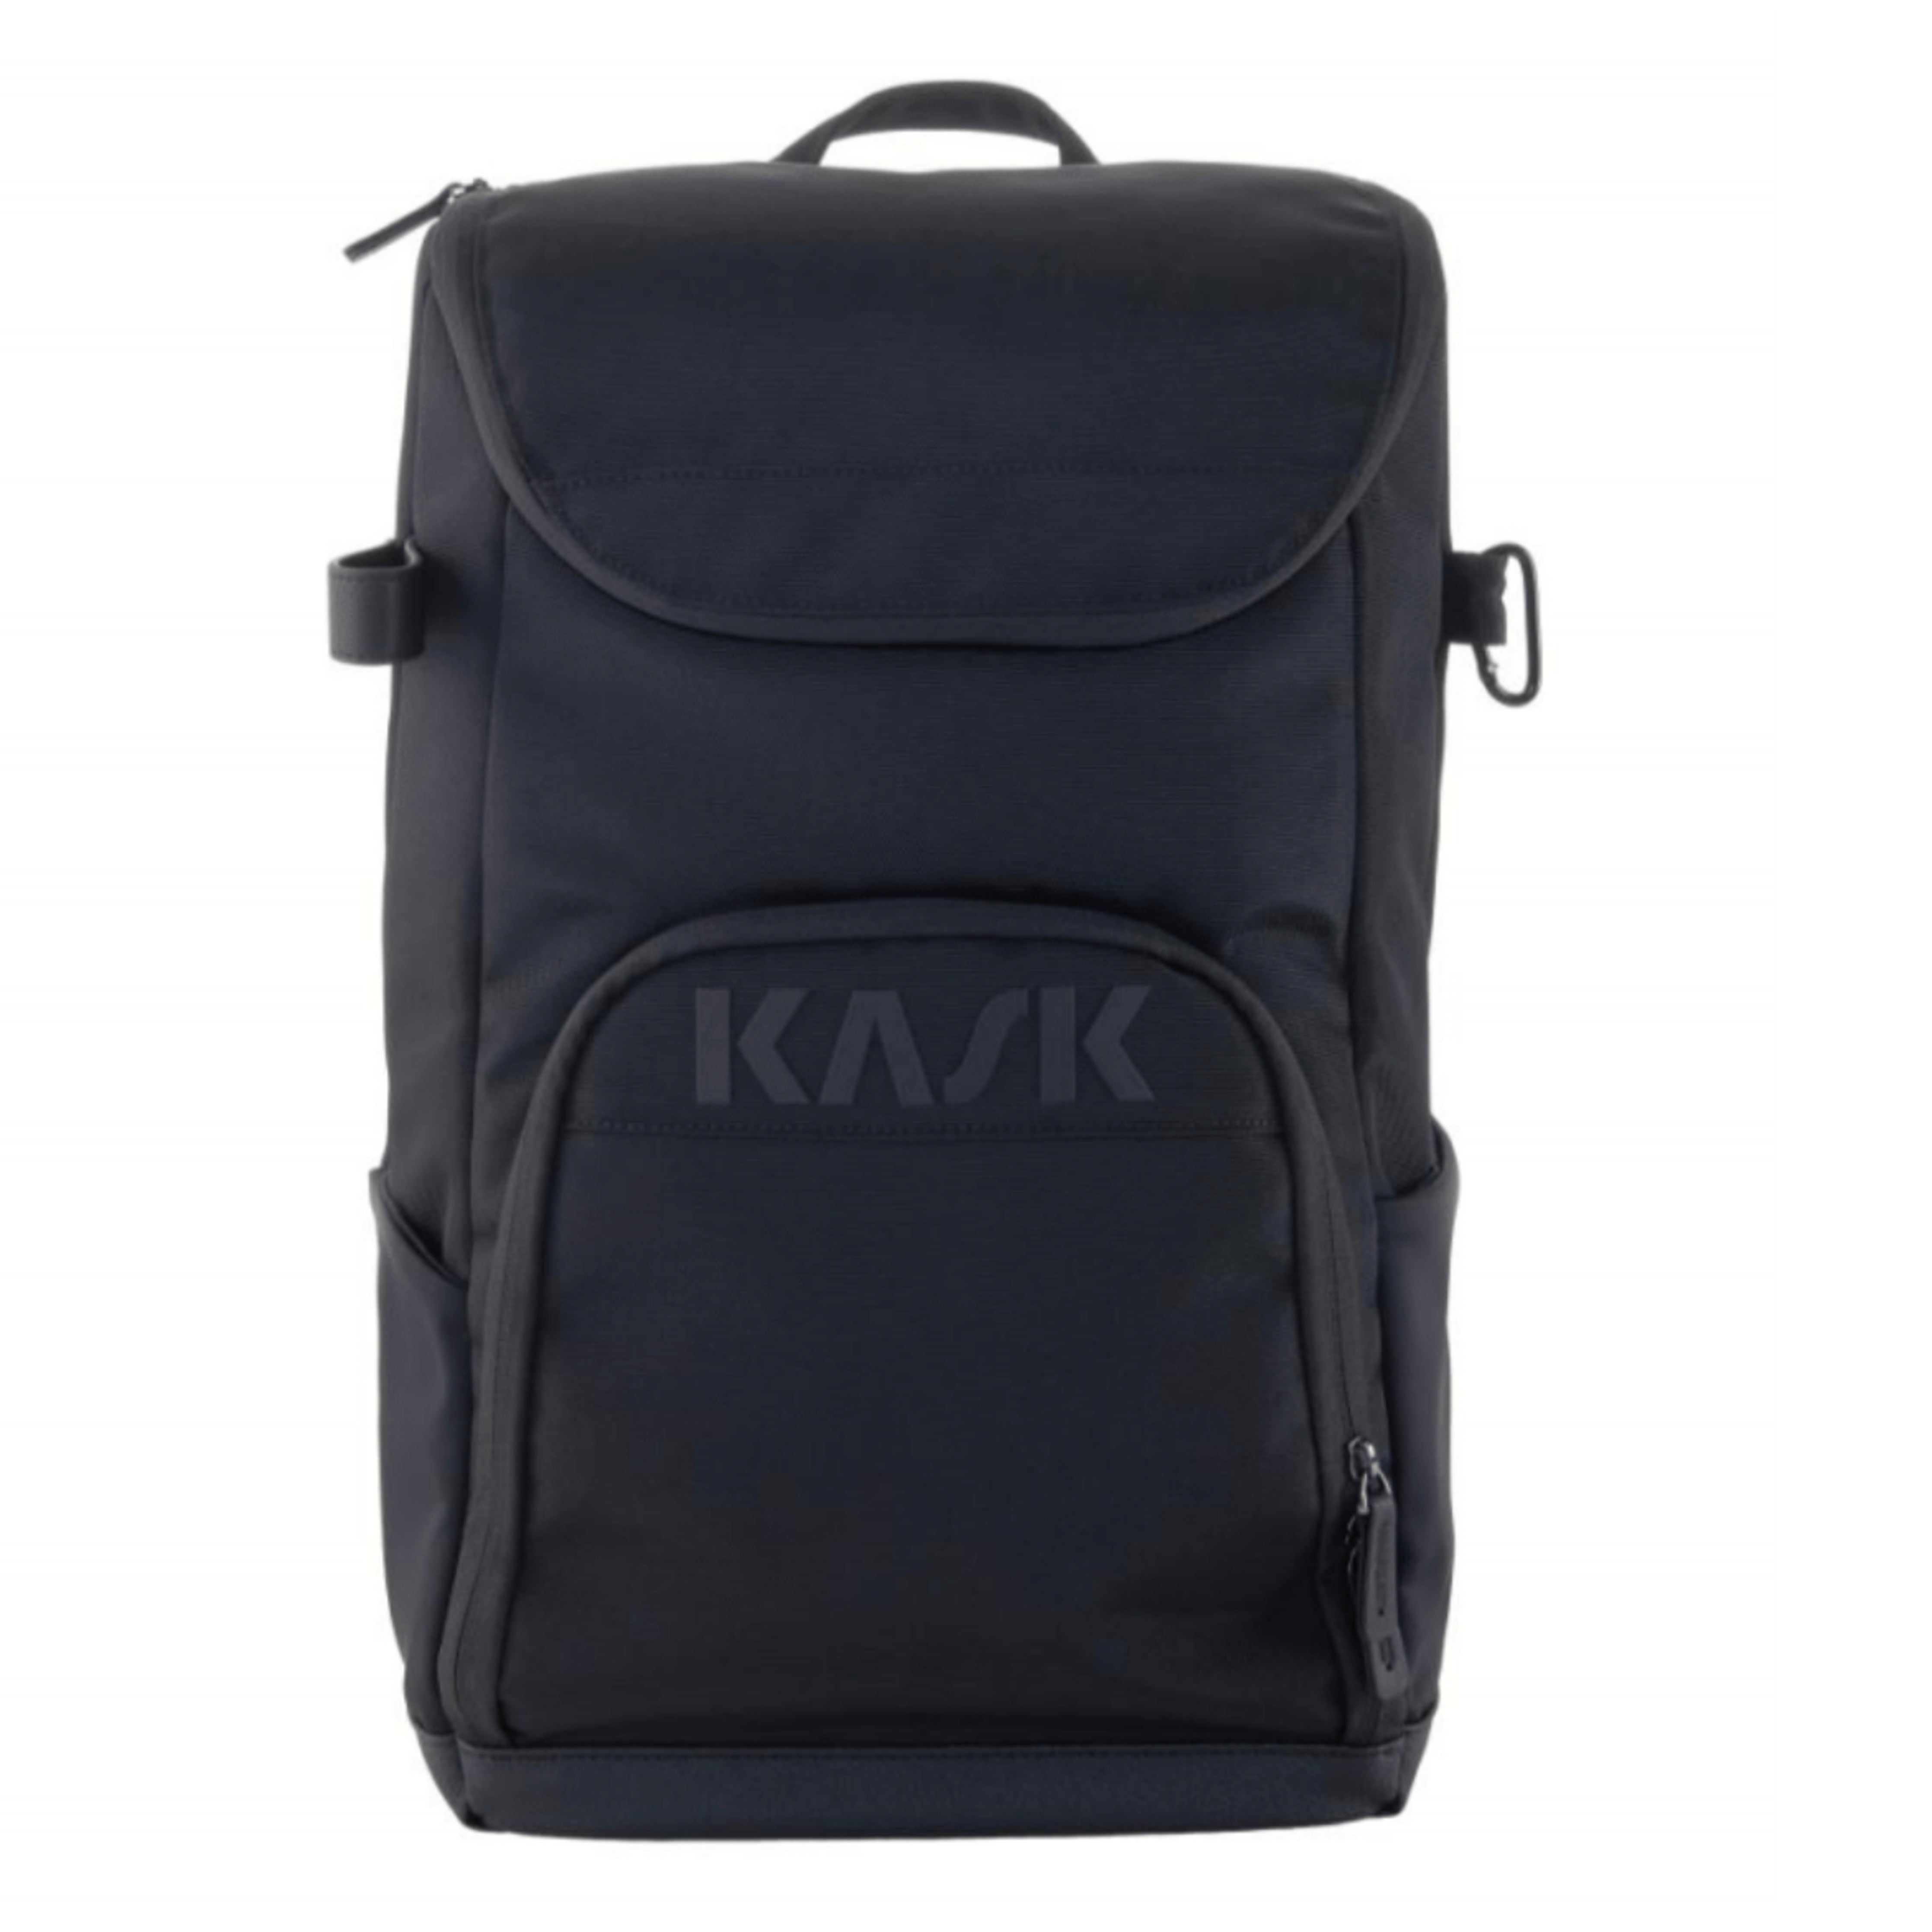 KASK Riders Backpack 22L